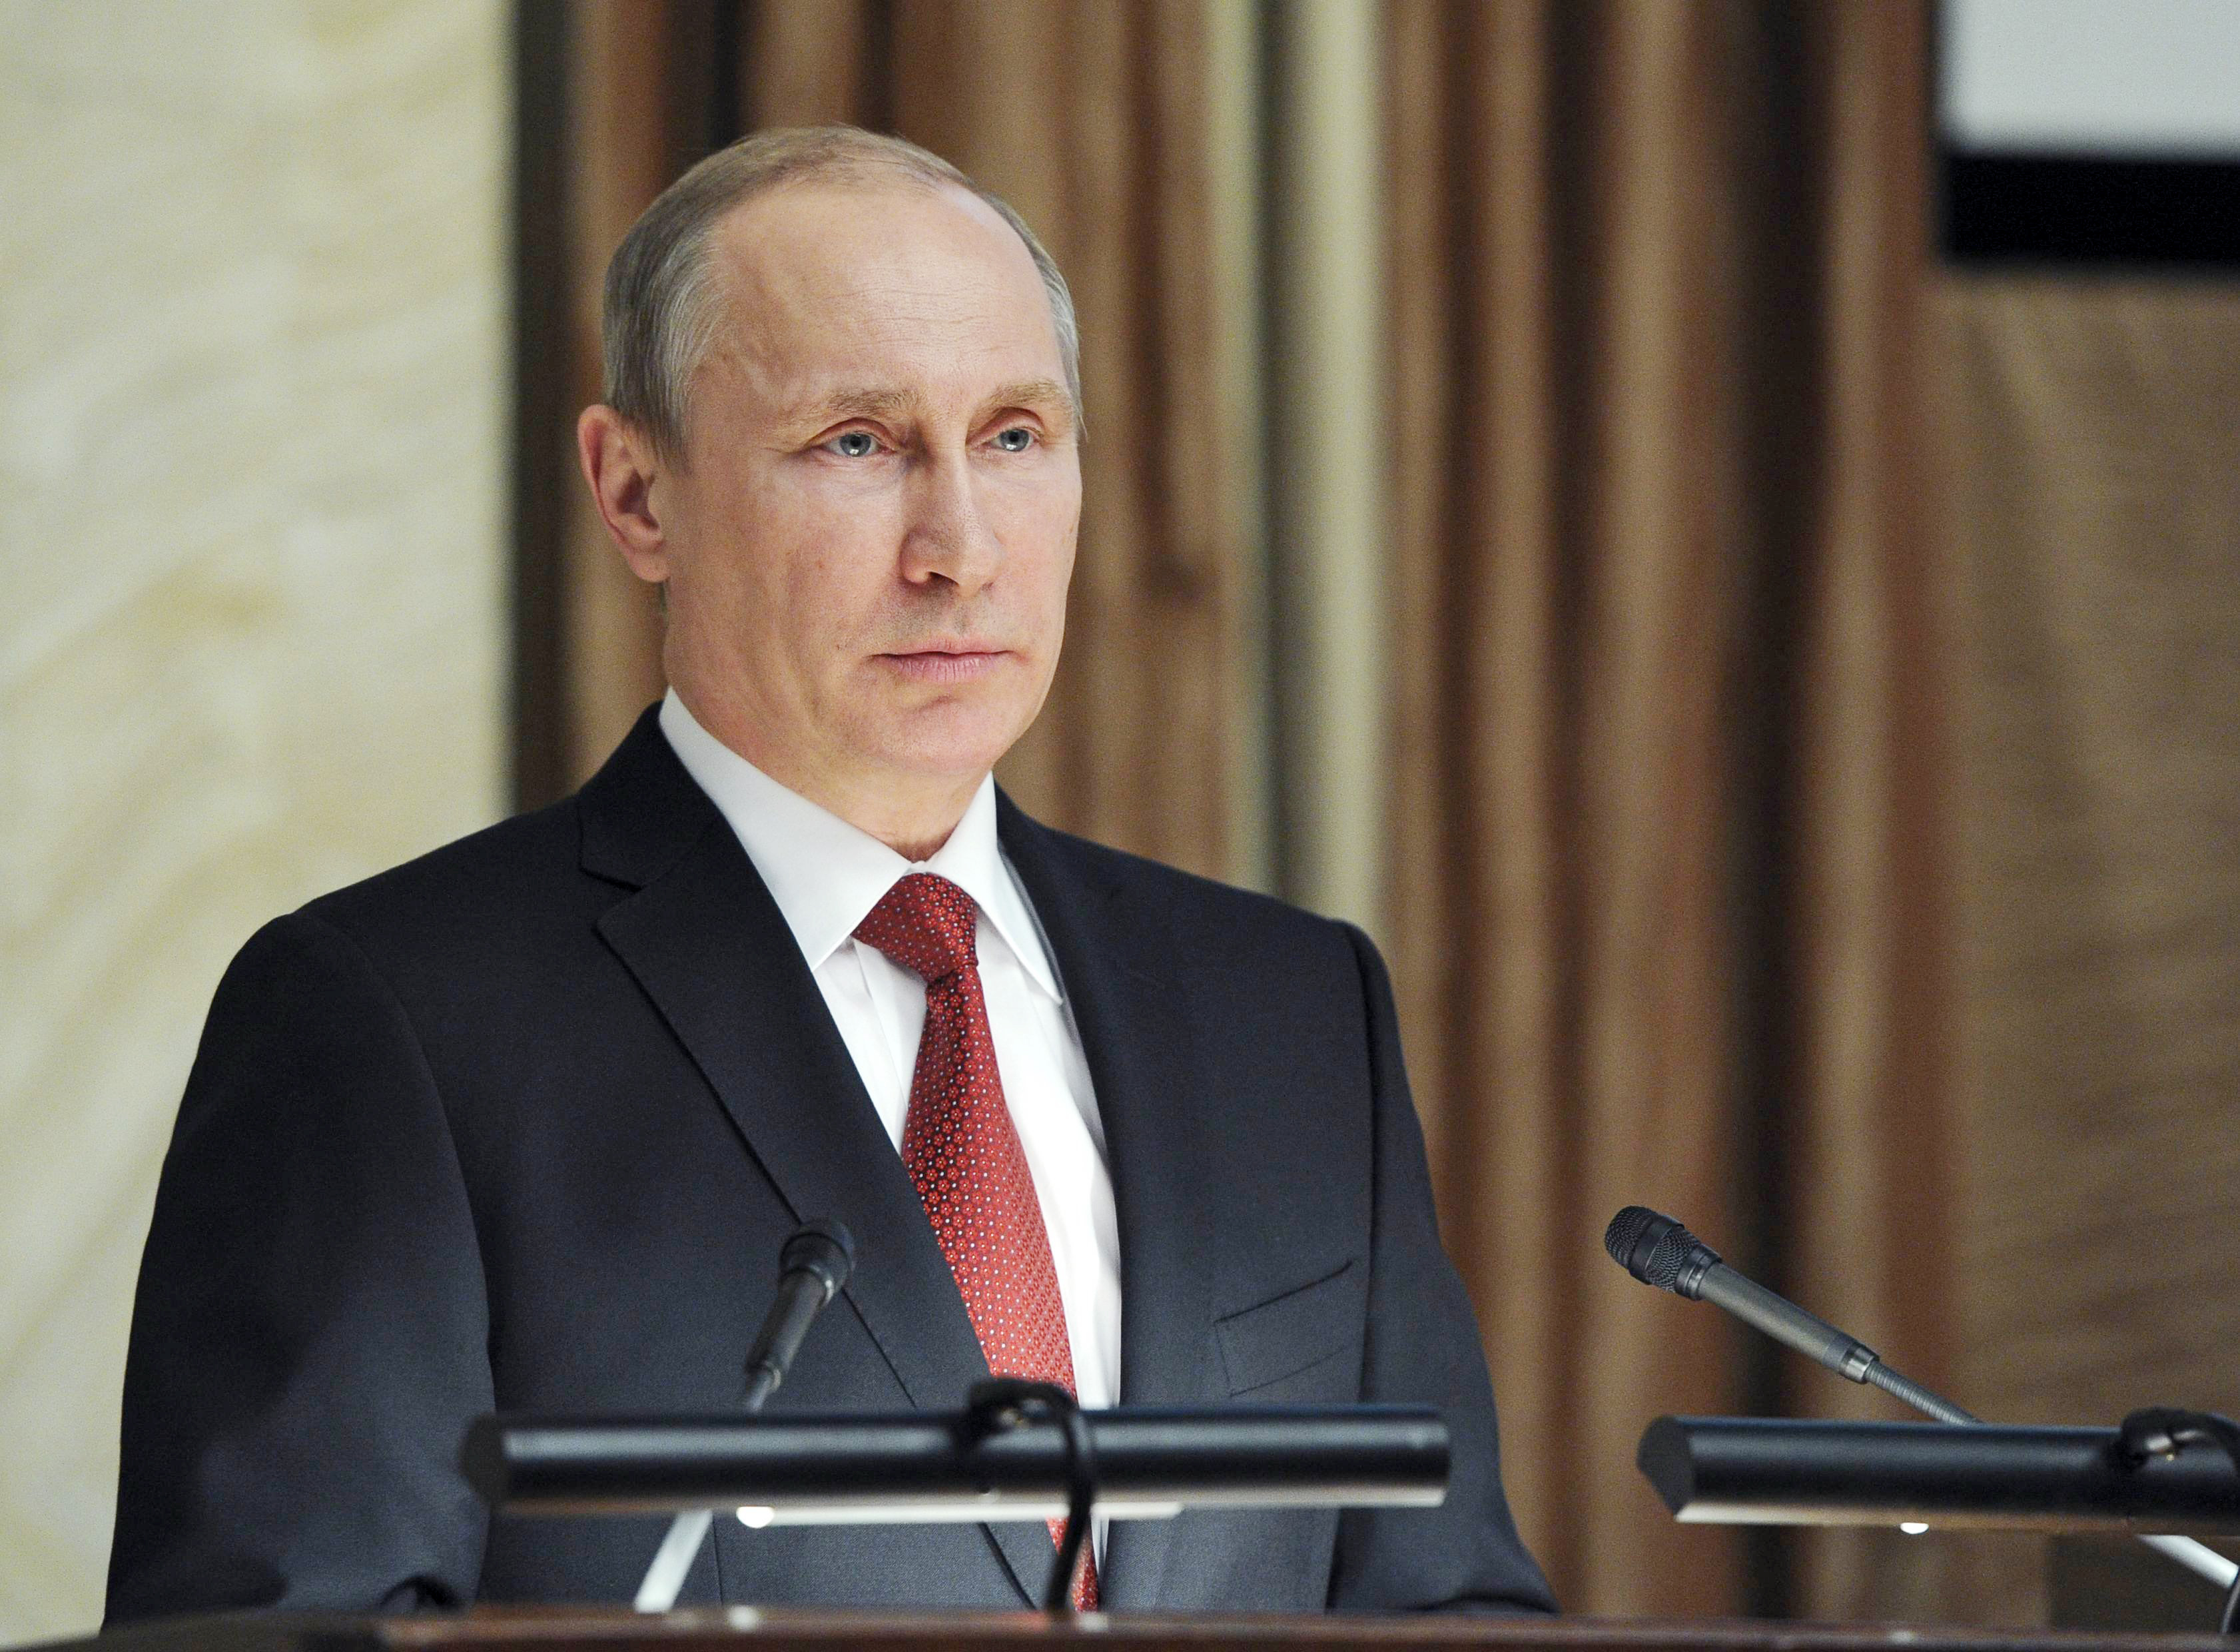 Russia's President Vladimir Putin delivers a speech during a session of the board of the FSB security service in Moscow April 7, 2014. (Mikhail Klimetyev—RIA Novosti/Kremlin/Reuters)